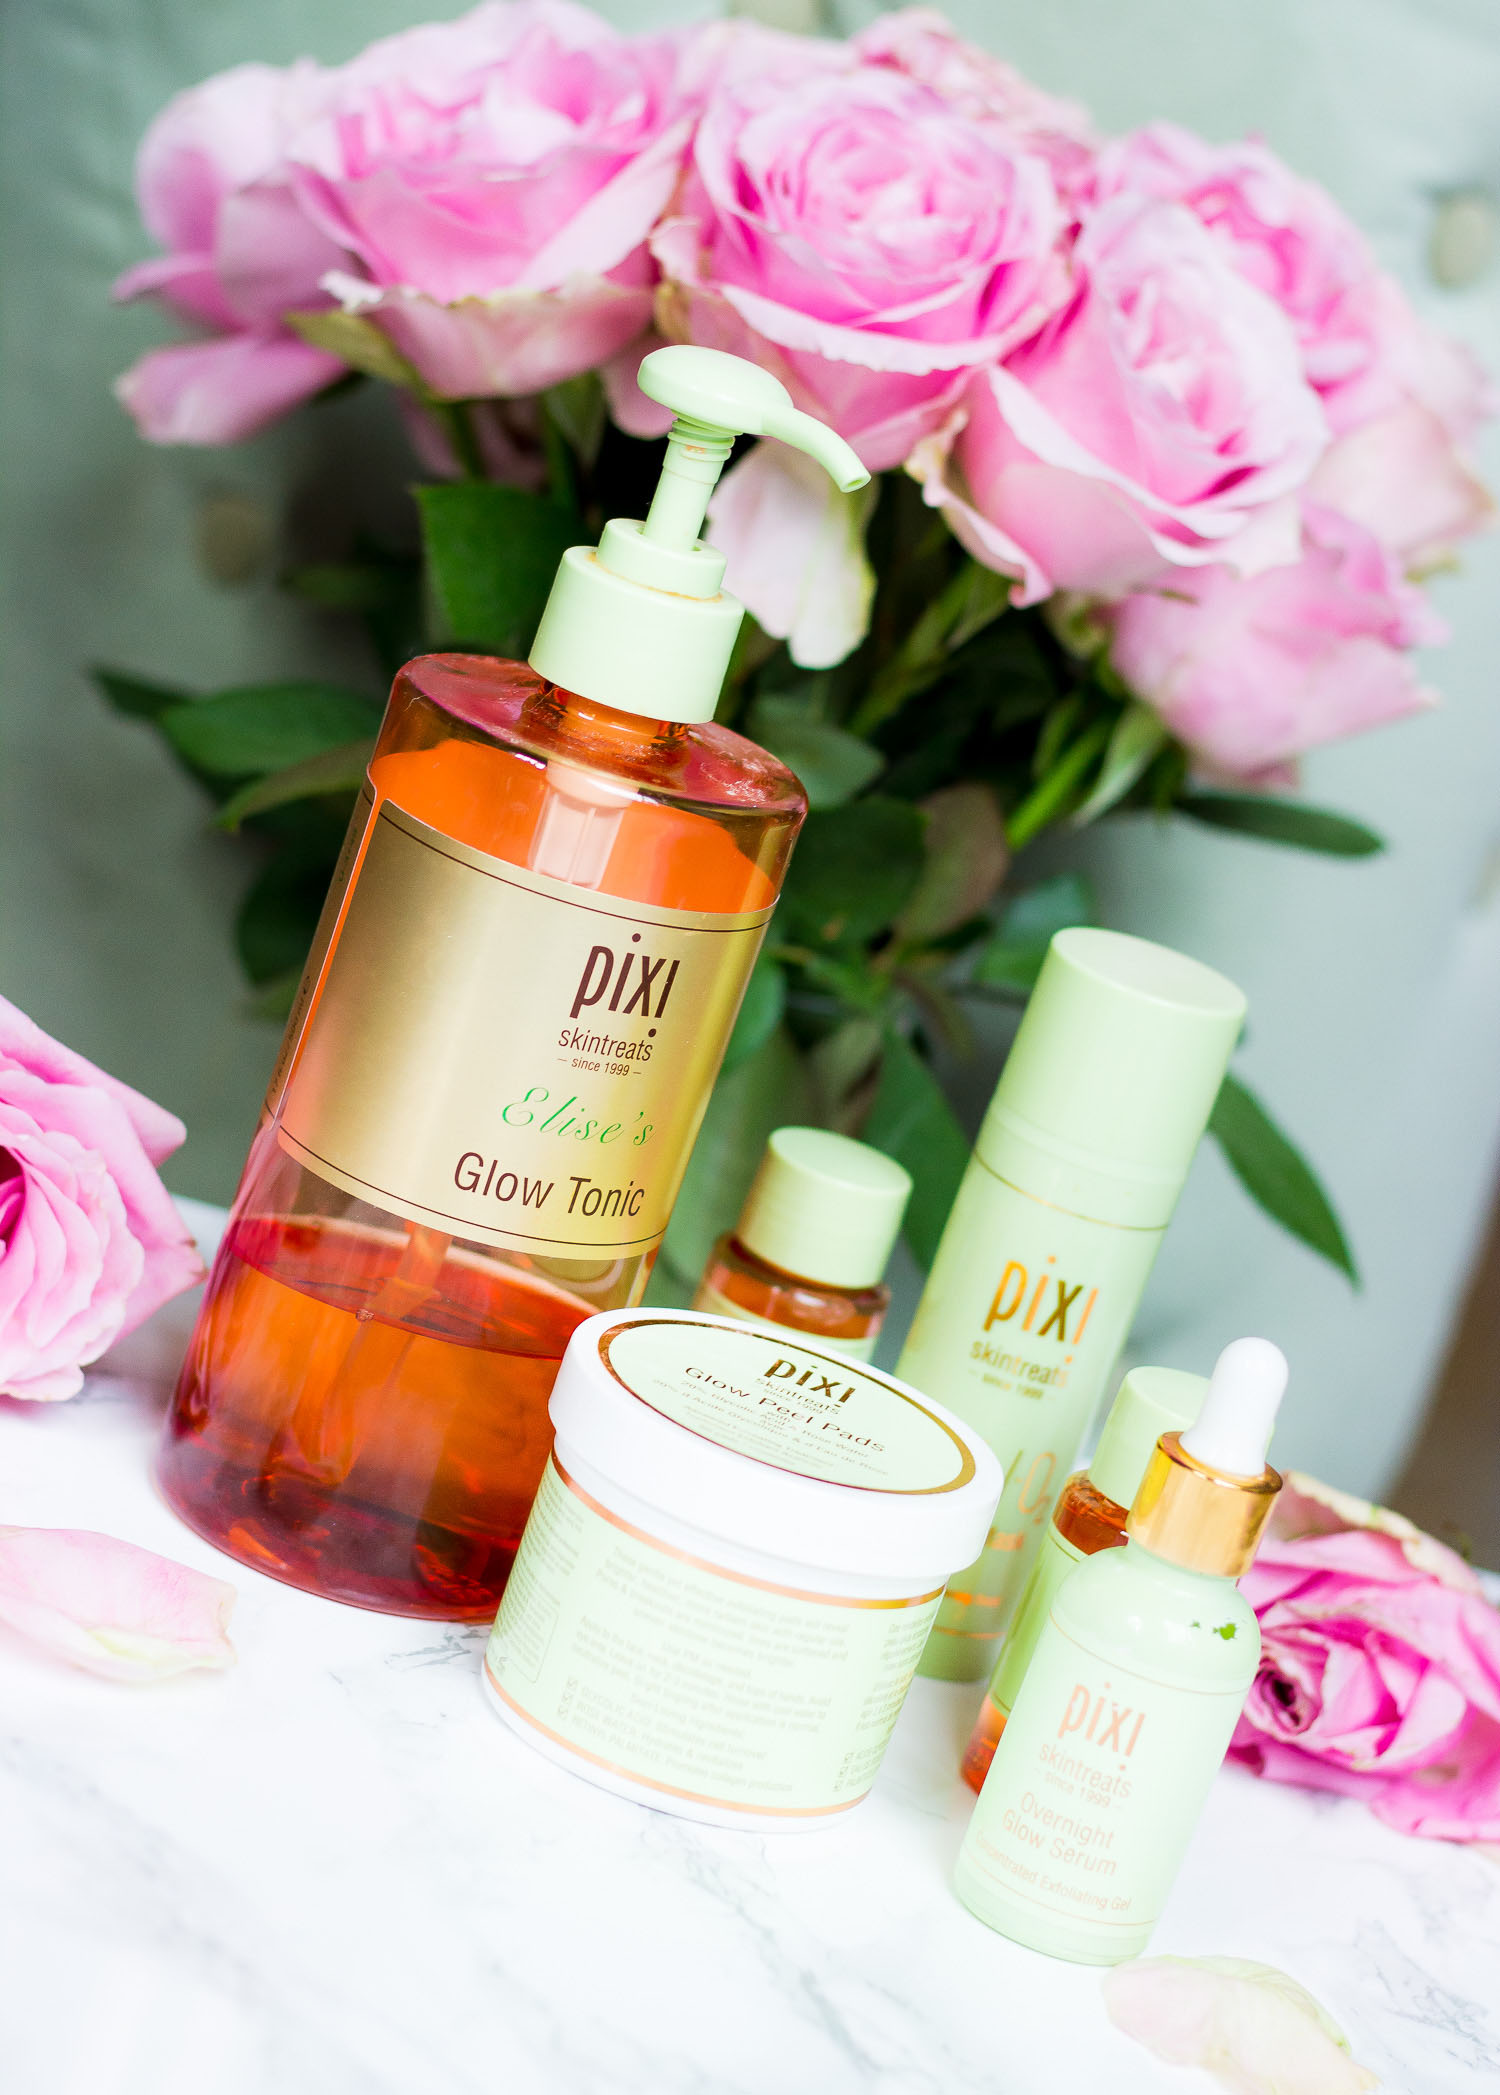 Best Pixi Beauty Products - Glow Tonic - on Belle Meets World blog by Elise Giannasi